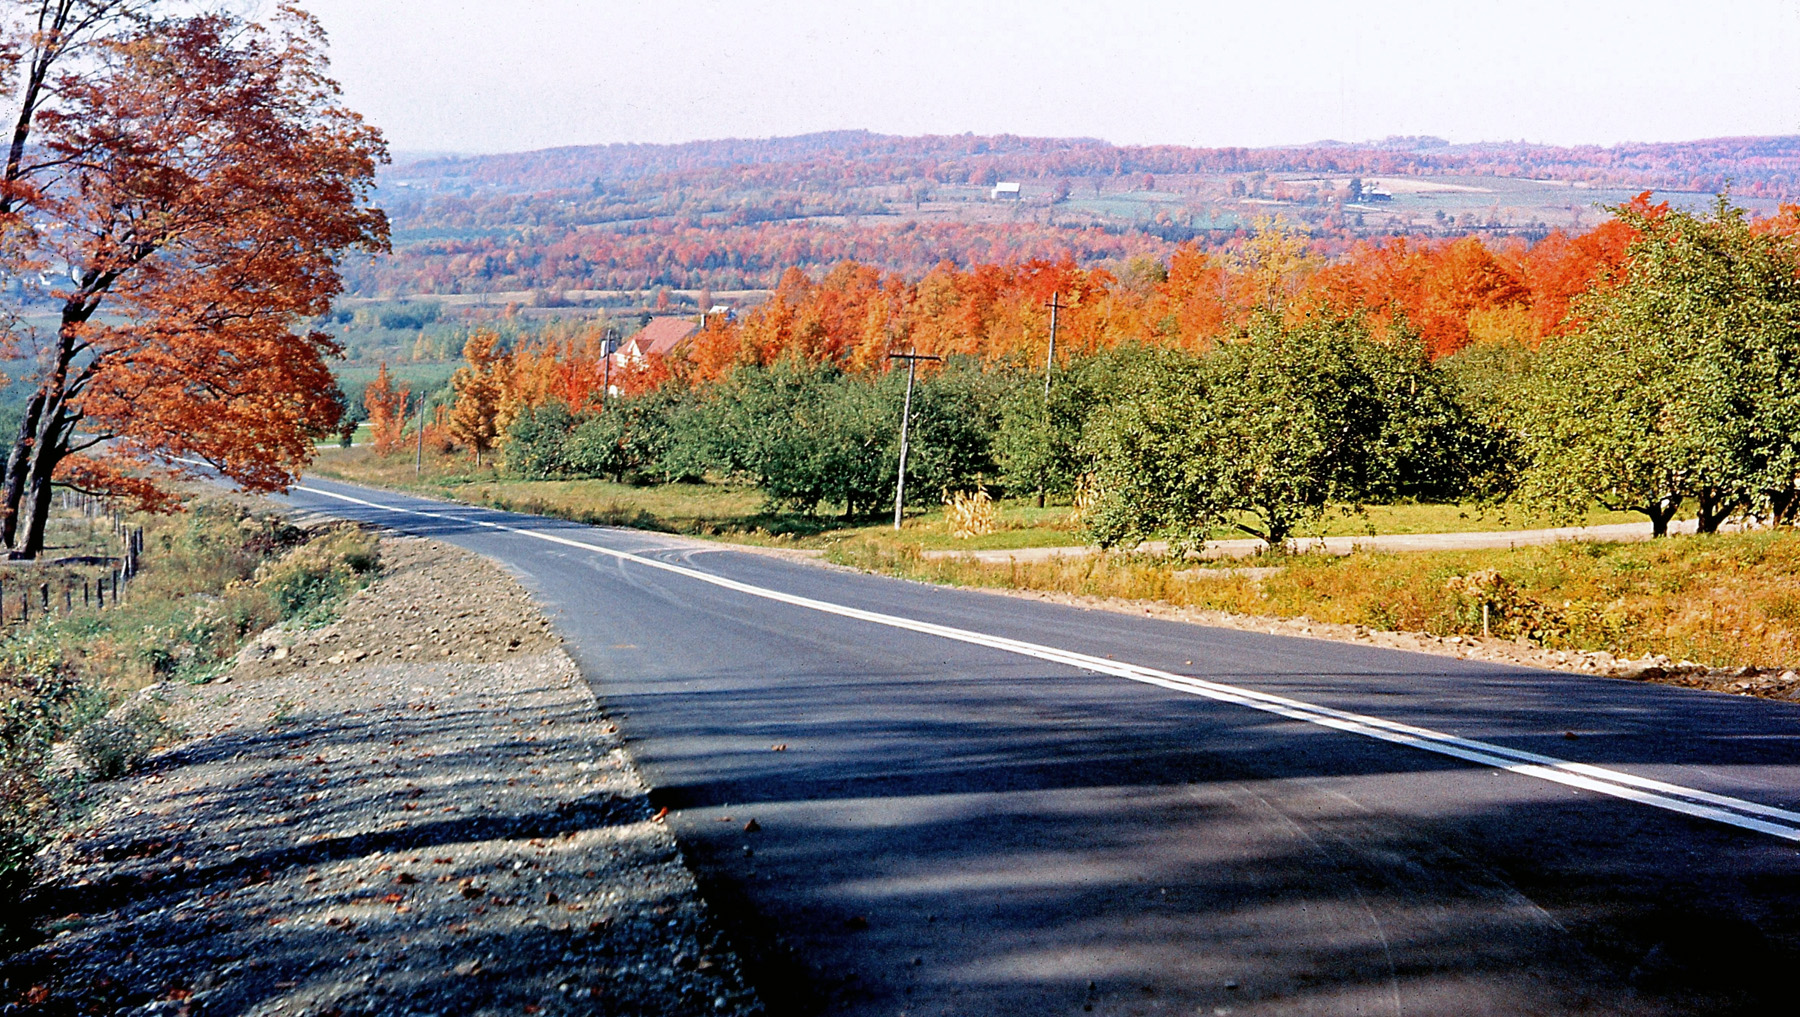 Dad loved to take us all on Sunday afternoon car trips through the Quebec Eastern Township countryside in the late 1950s. This is one of his autumn shots, with us waiting patiently in the car. Now my patient wife waits for me when I take shots. View full size.